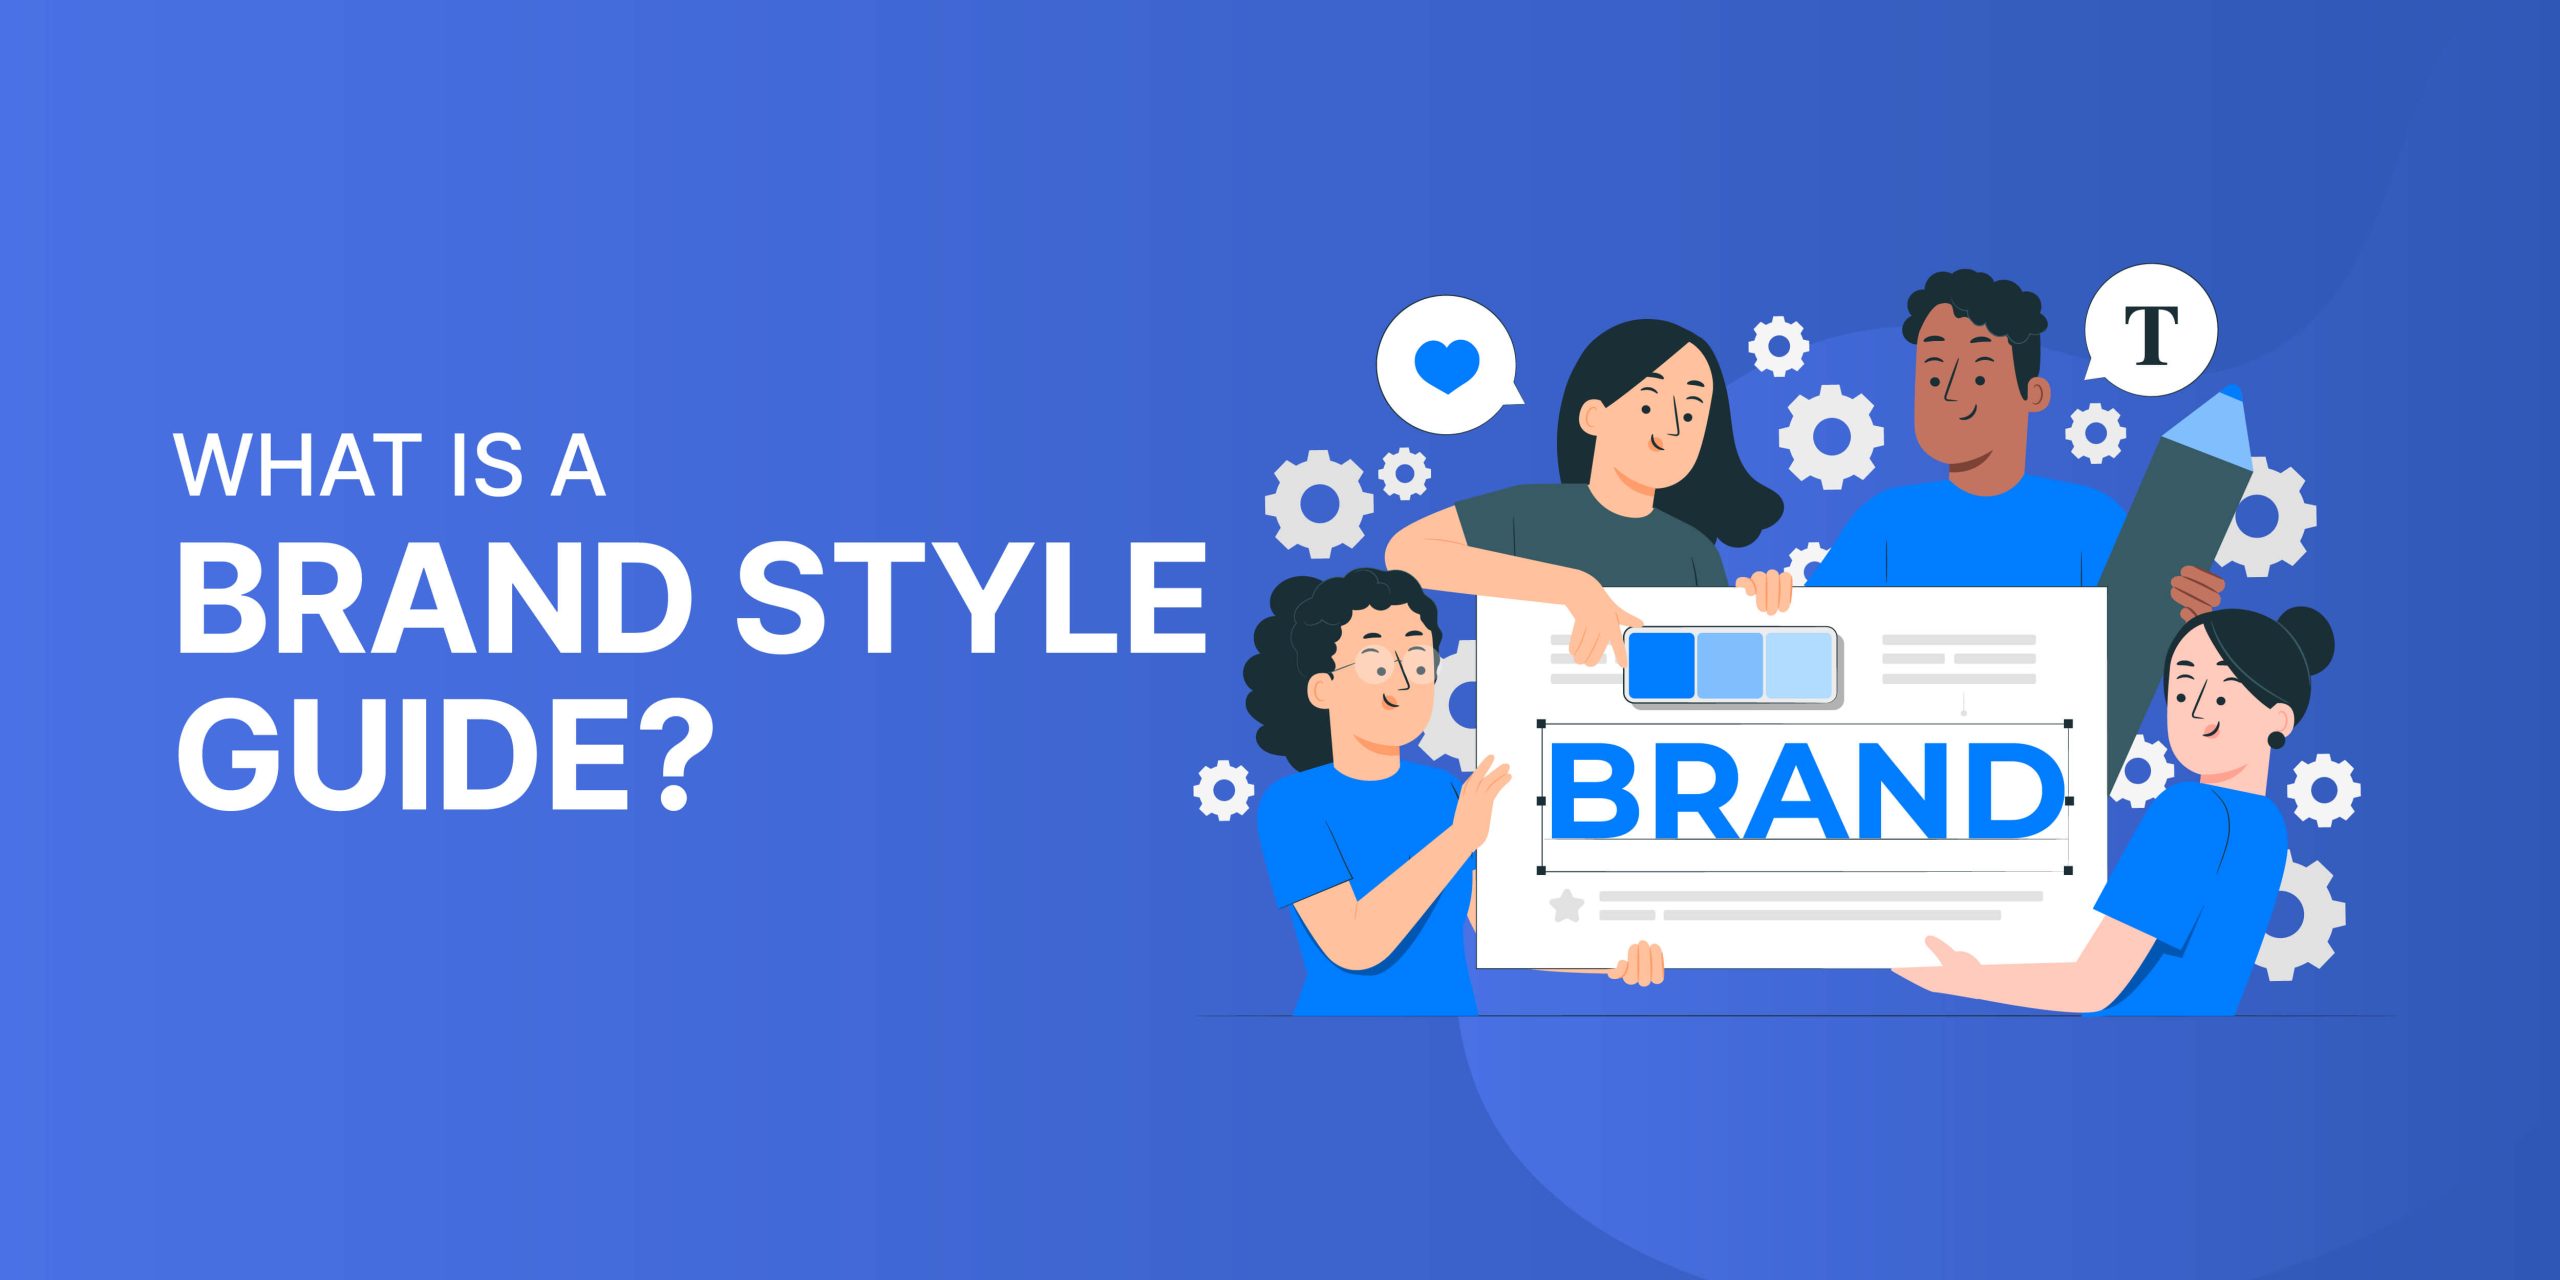 What Is a Brand Style Guide